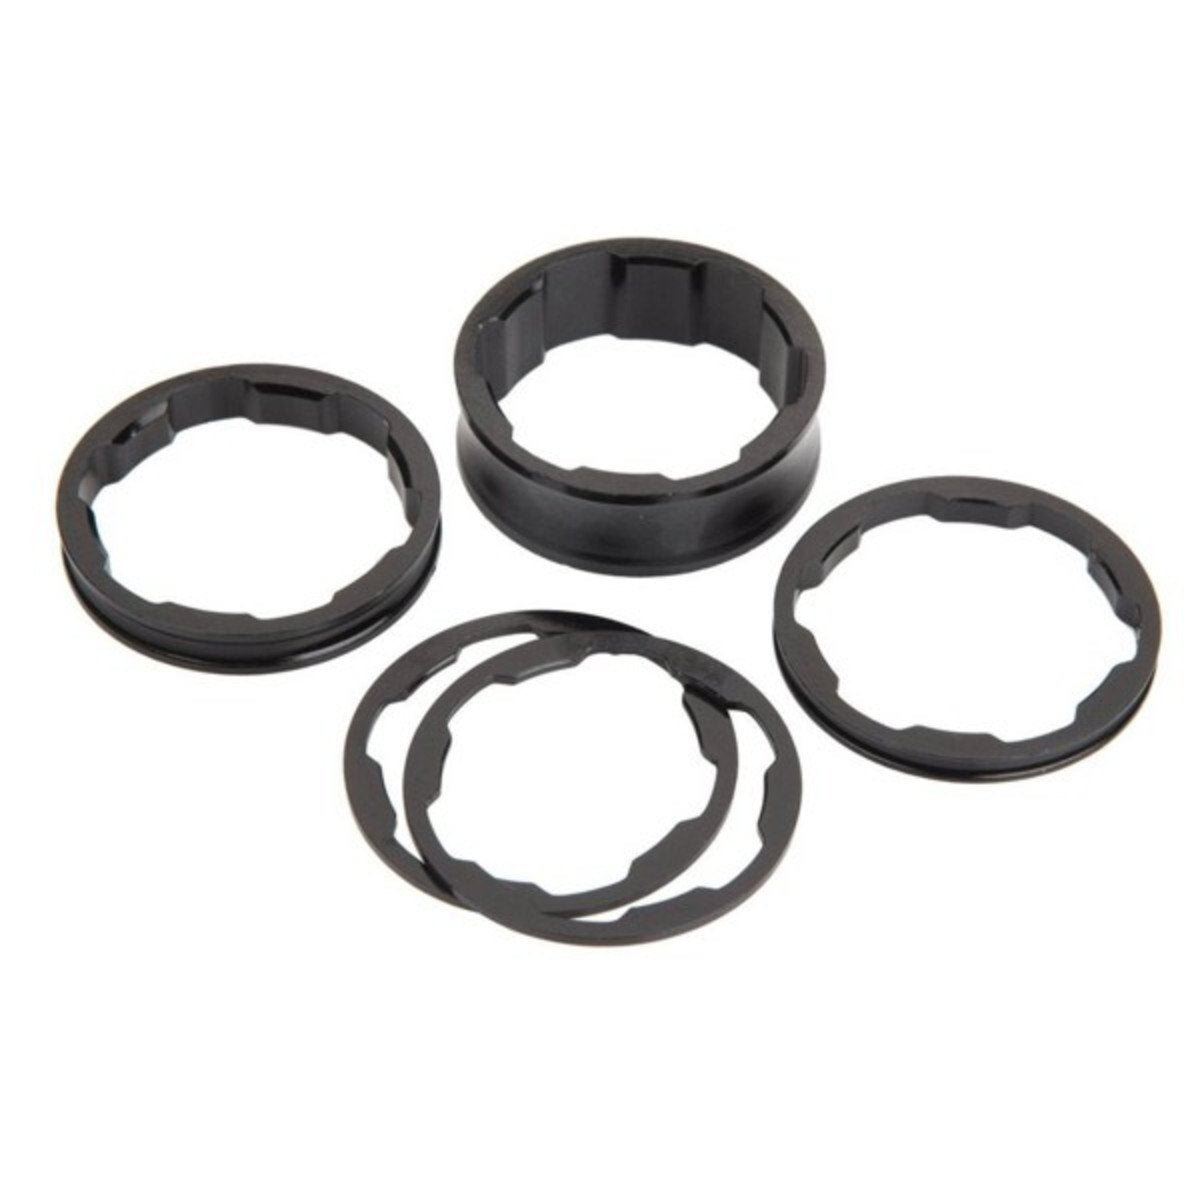 BOX TWO HEADSET SPACER KIT